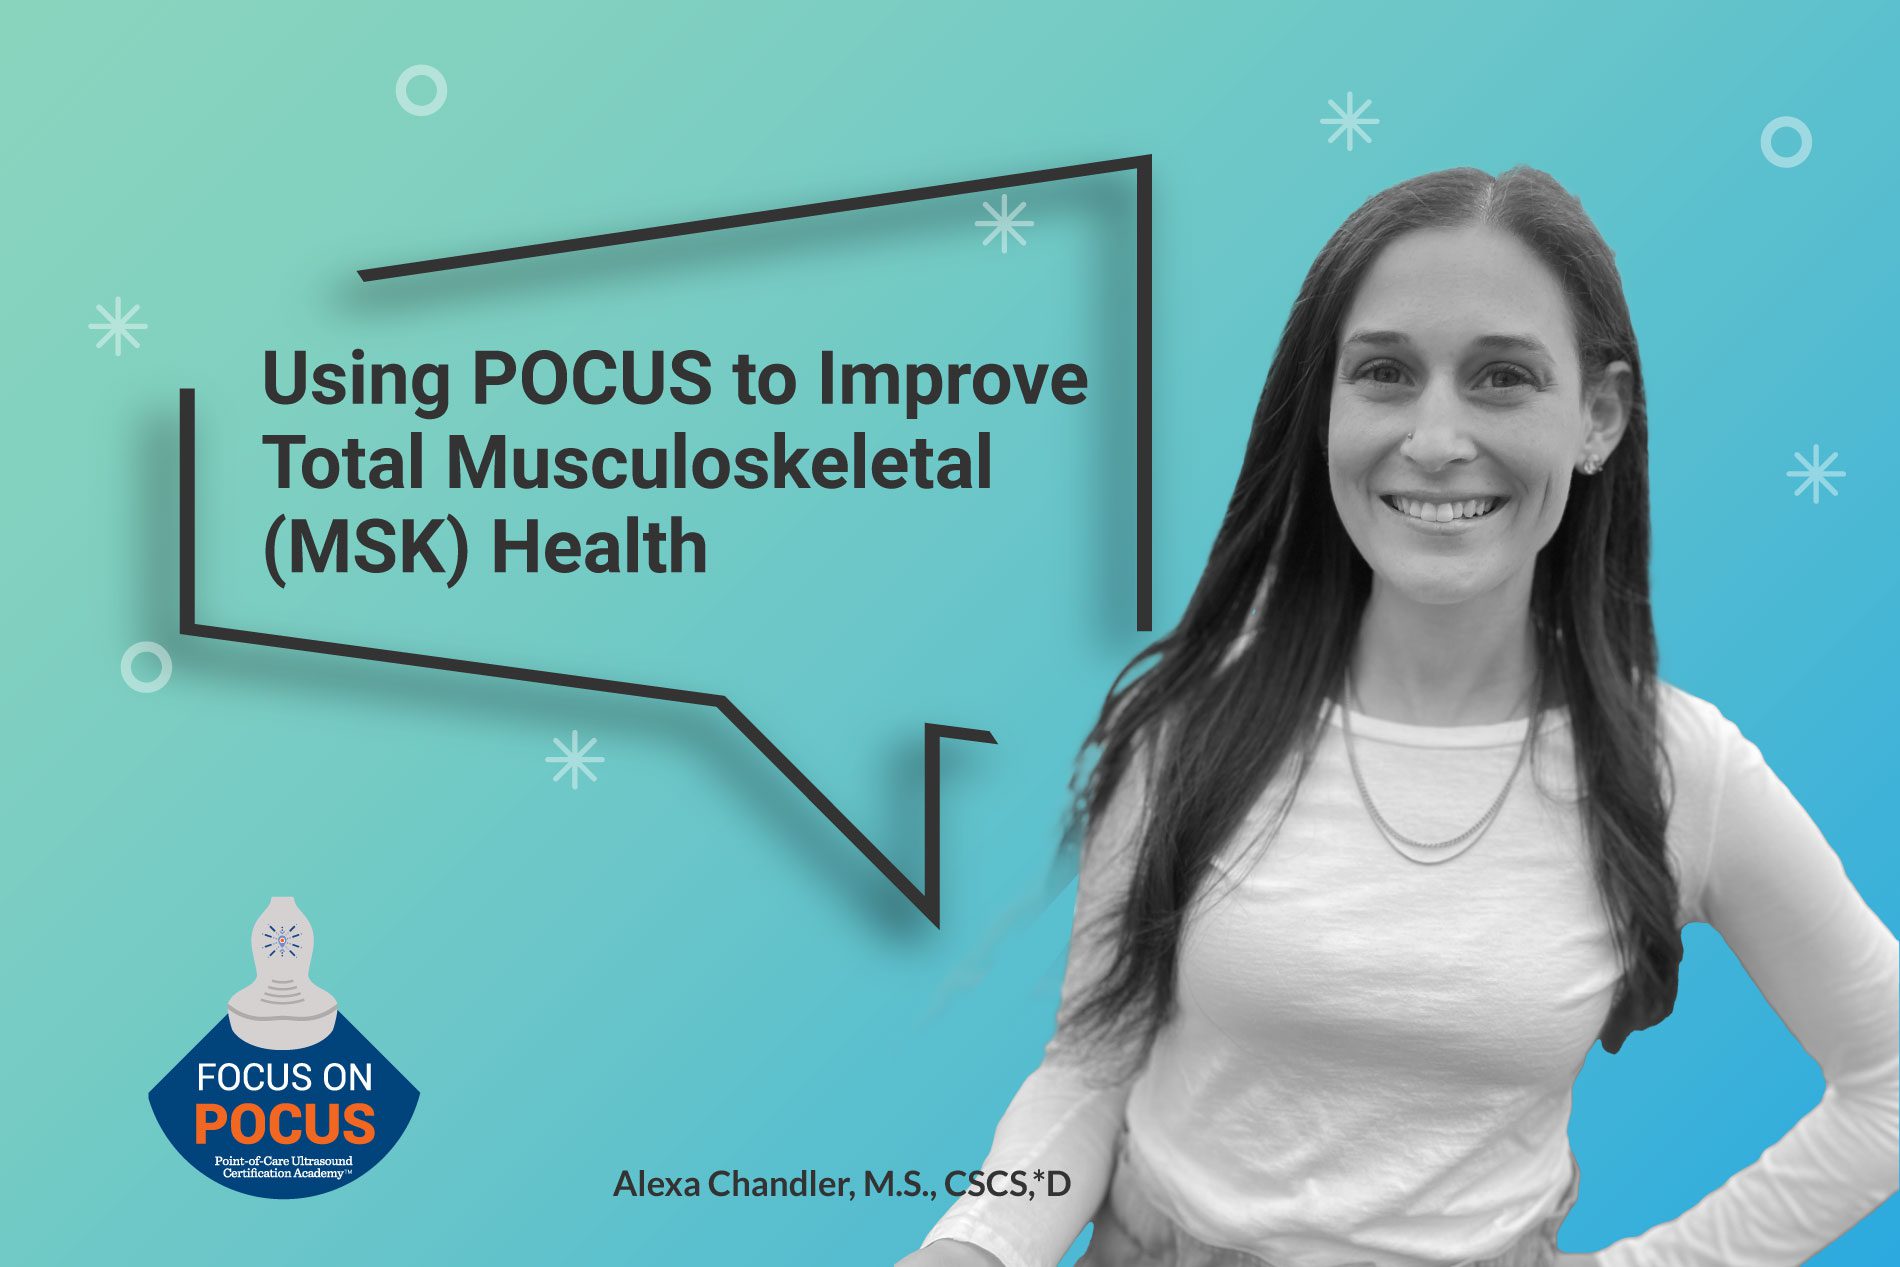 Using POCUS Improve Total Musculoskeletal Health Point-of-Care Ultrasound Academy